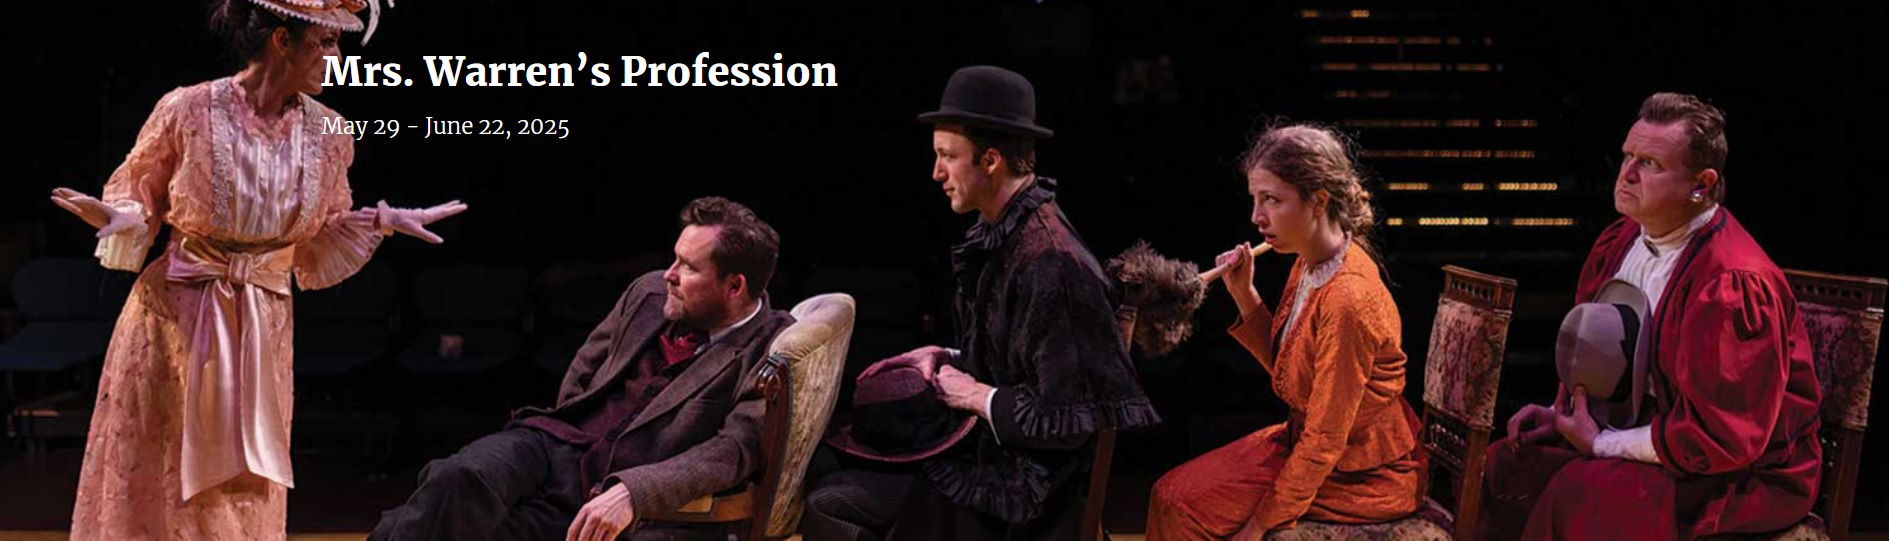 "Mrs. Warren's Profession" - by George Bernard Shaw - Central Square Theater (Cambridge, MA.)